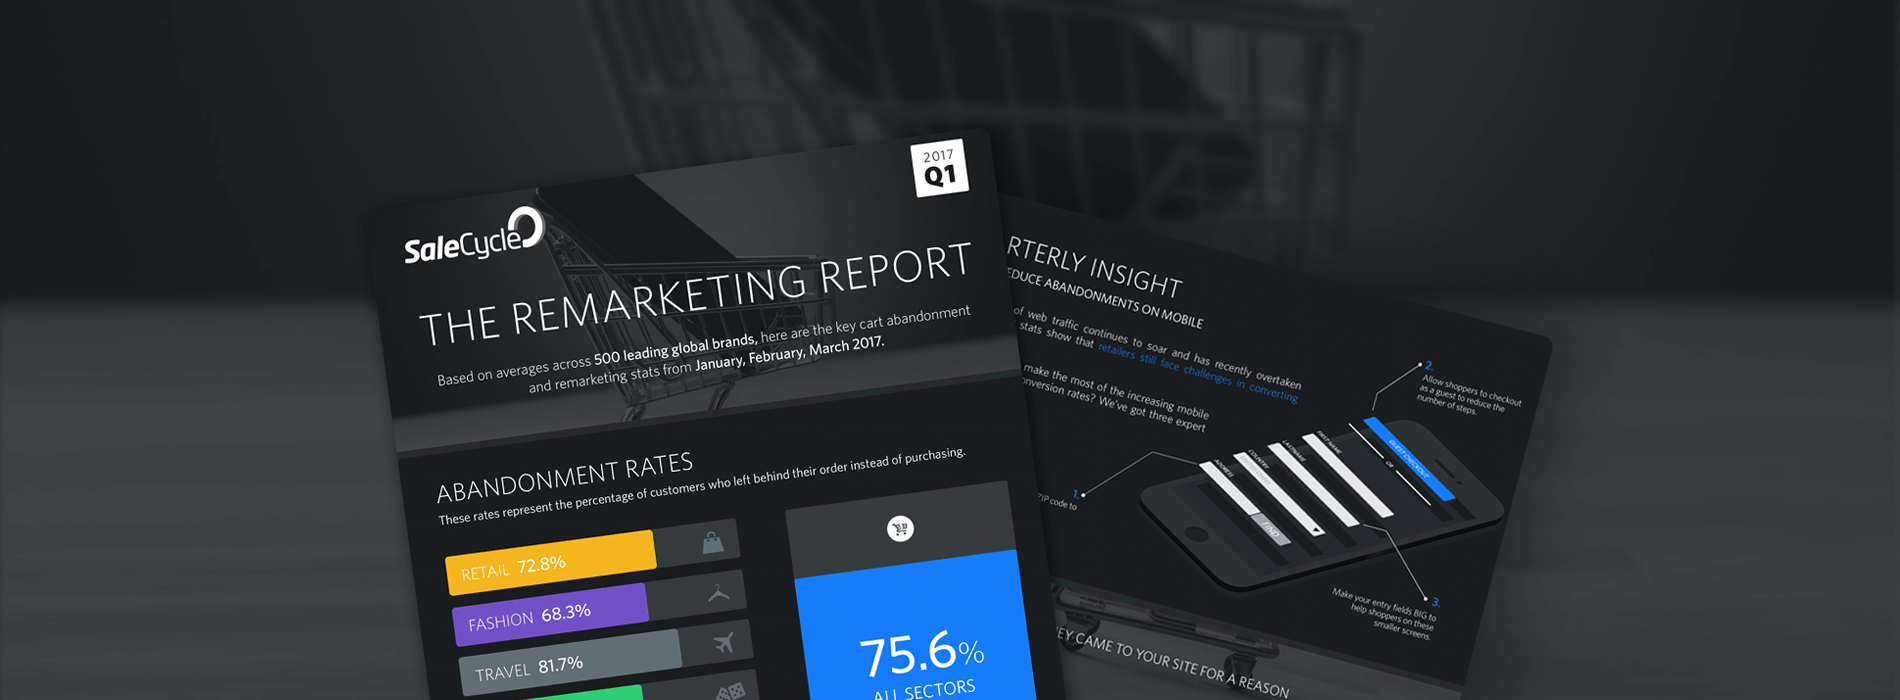 [Infographic] The Remarketing Report – Q1 2017